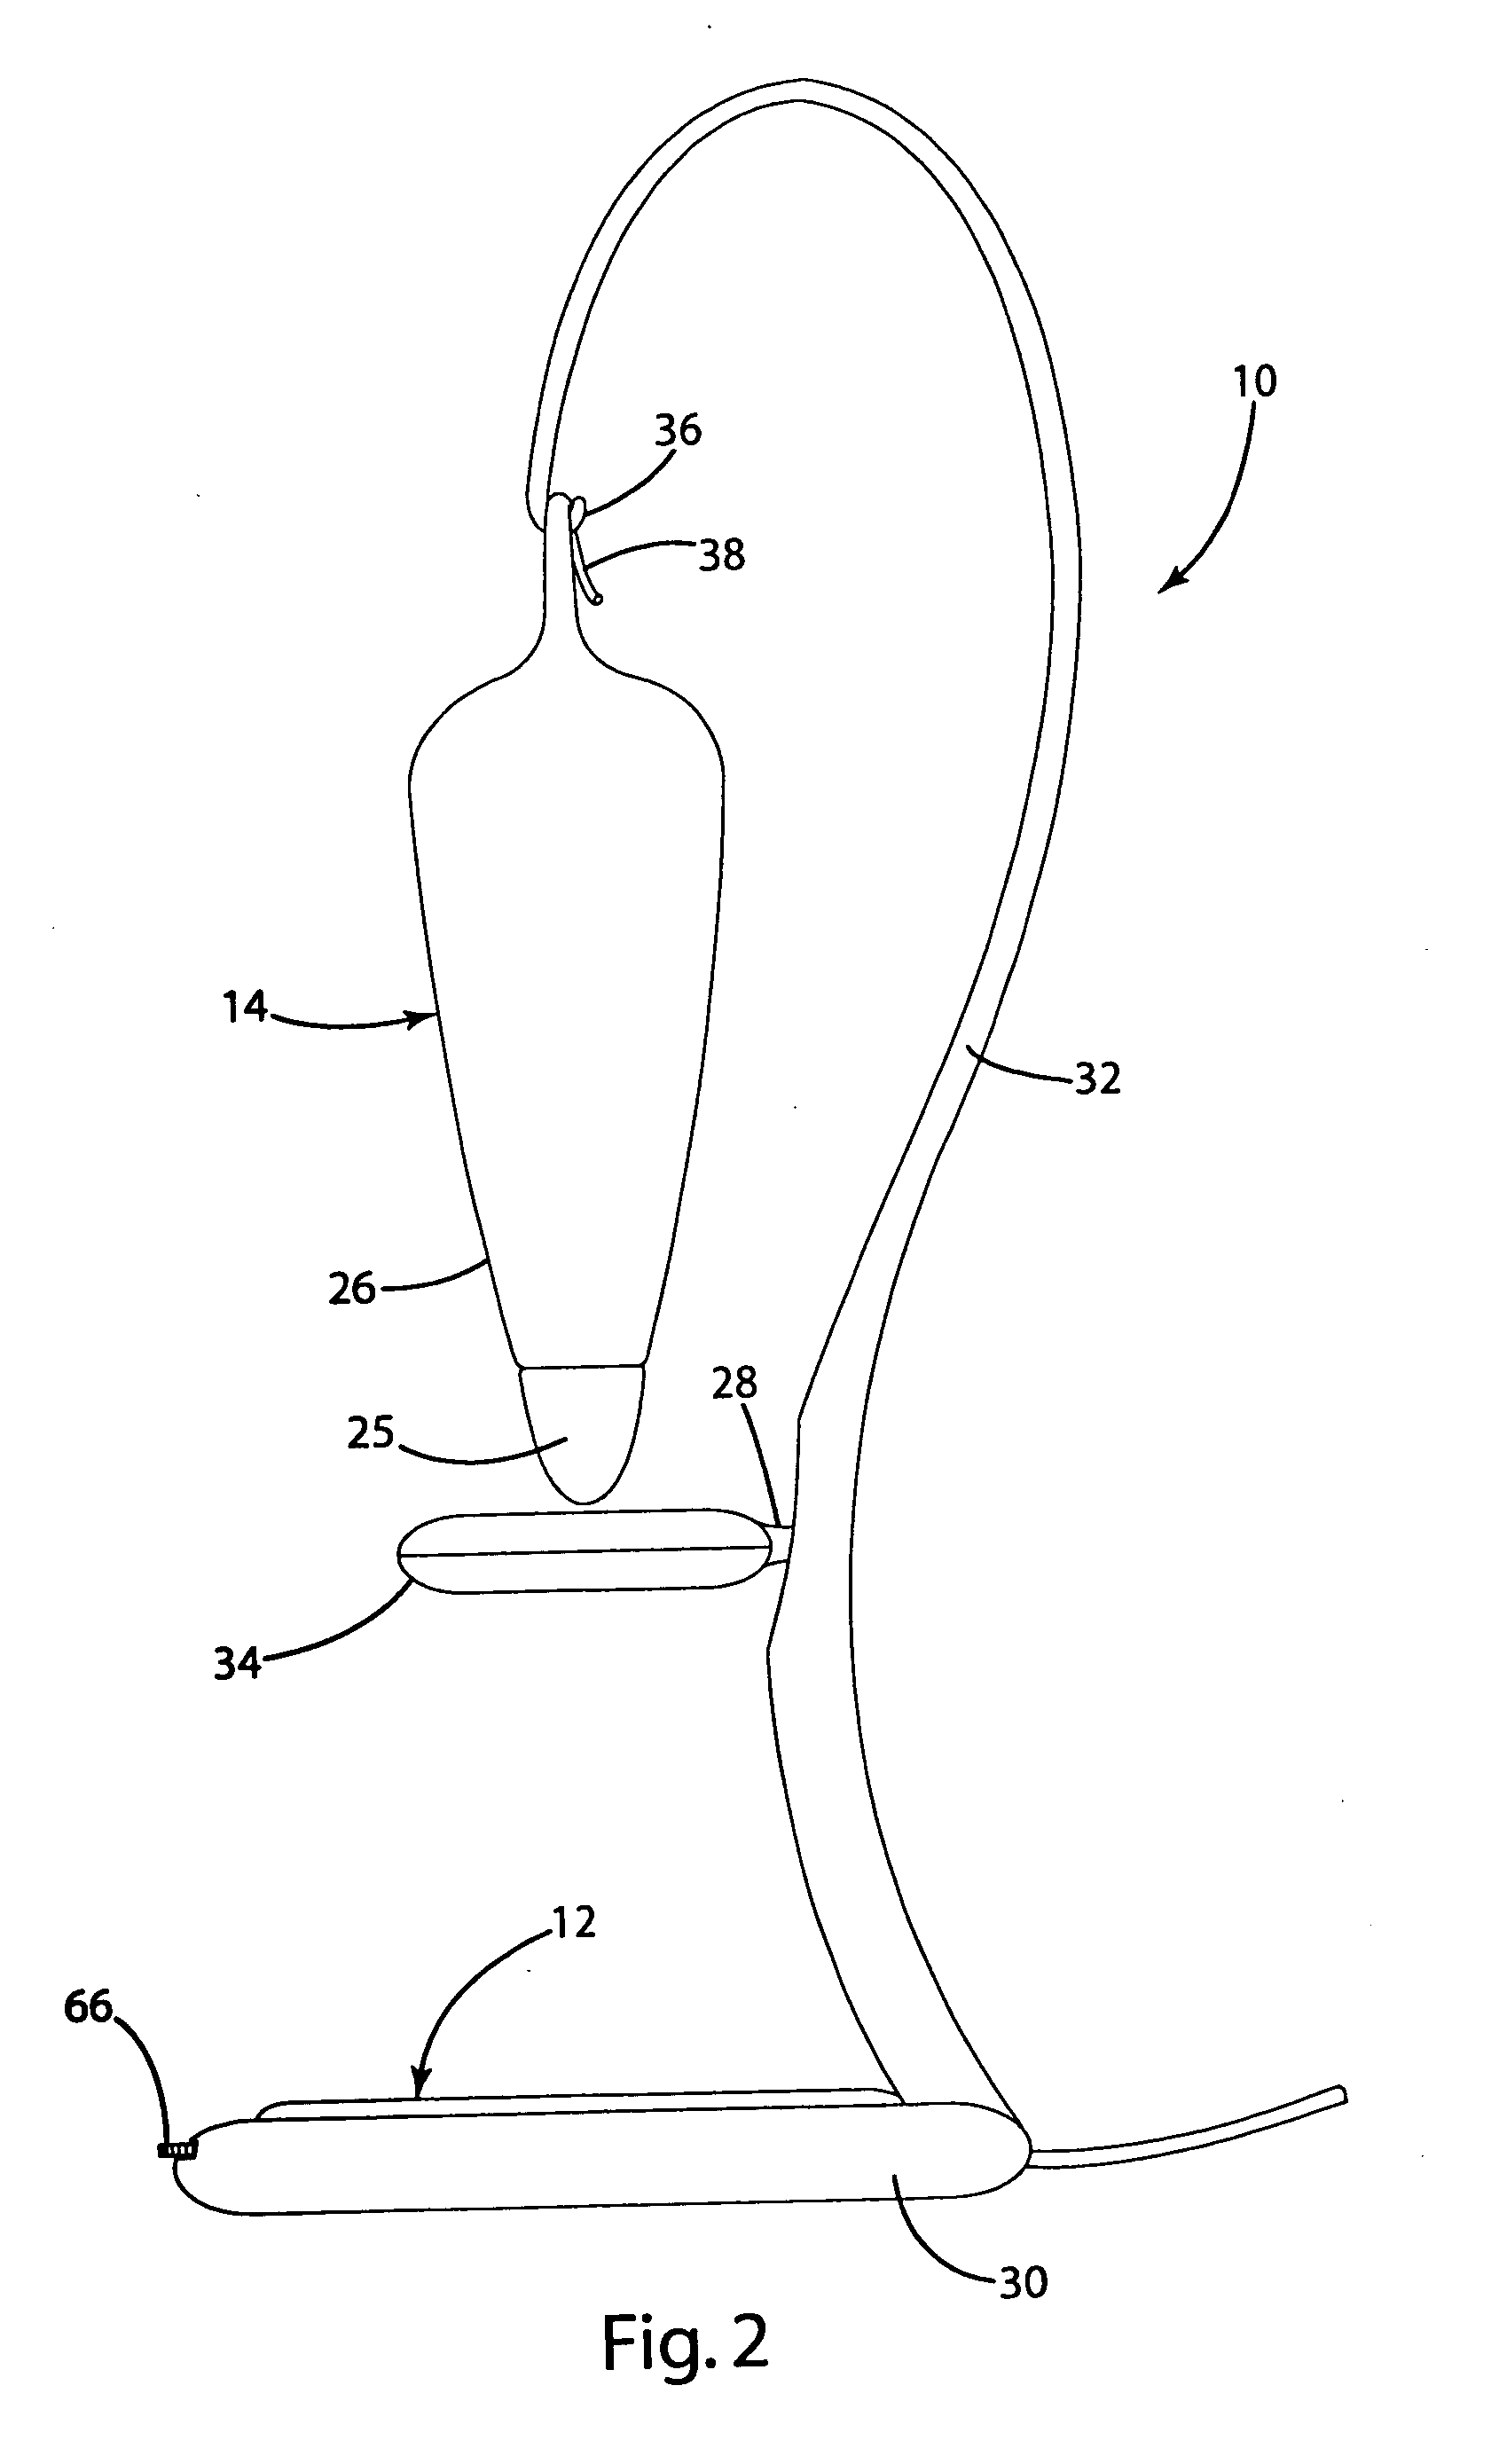 Inductively powered apparatus